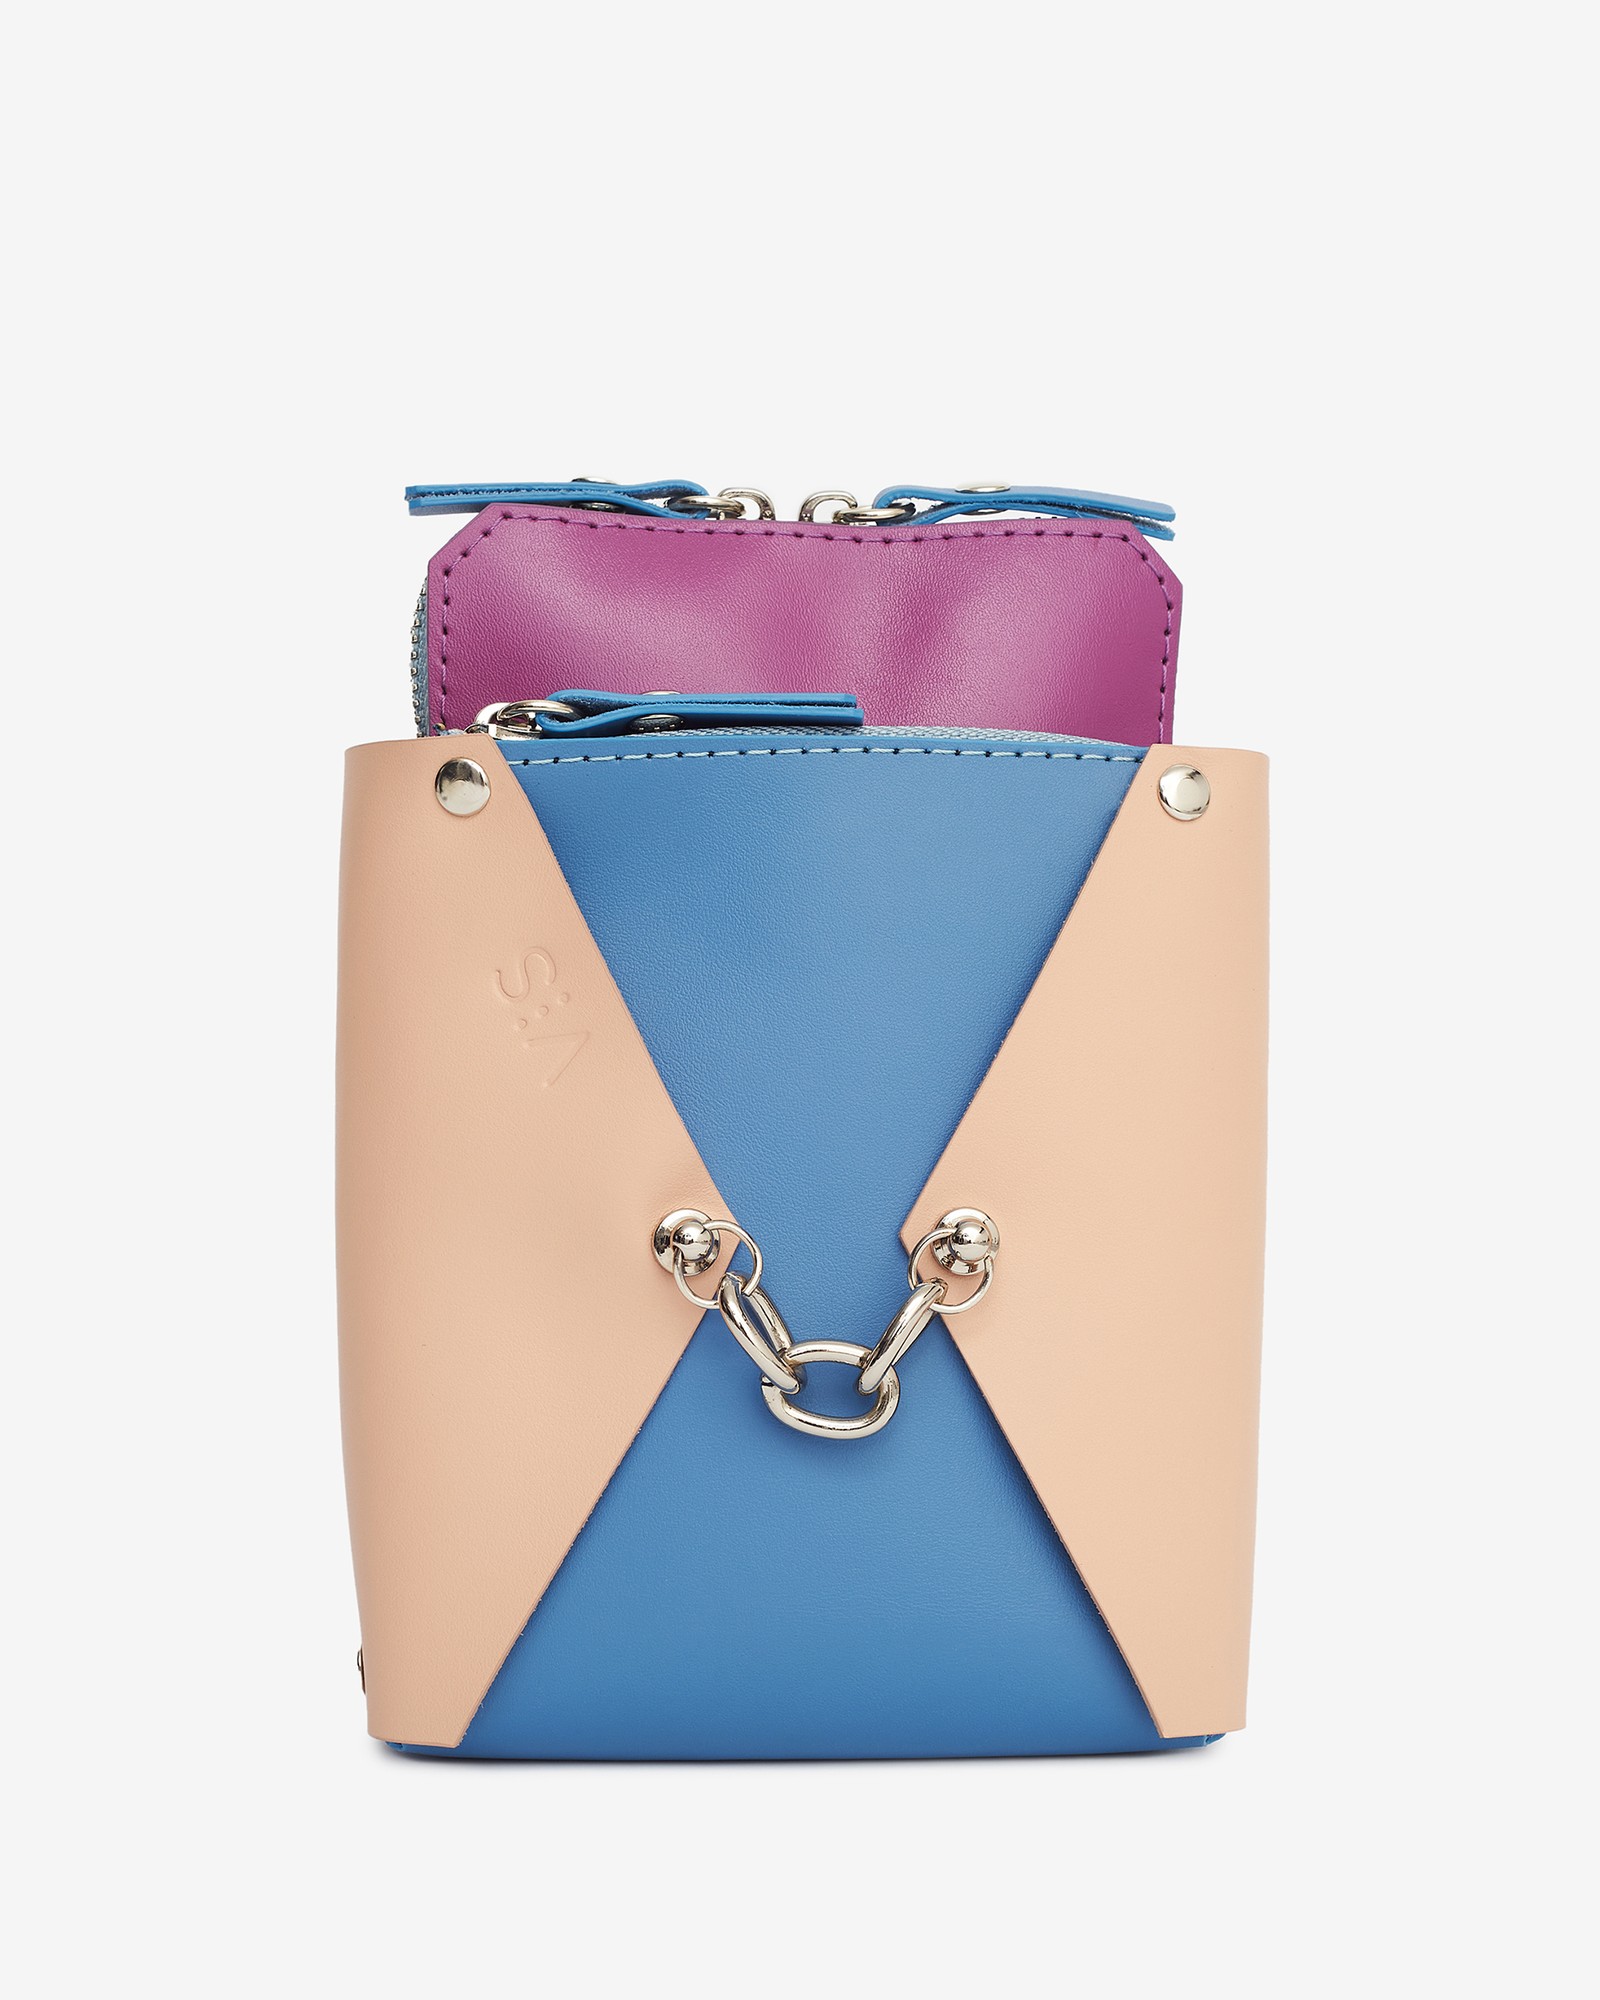 Talia leather bag in blue, pink and purple color